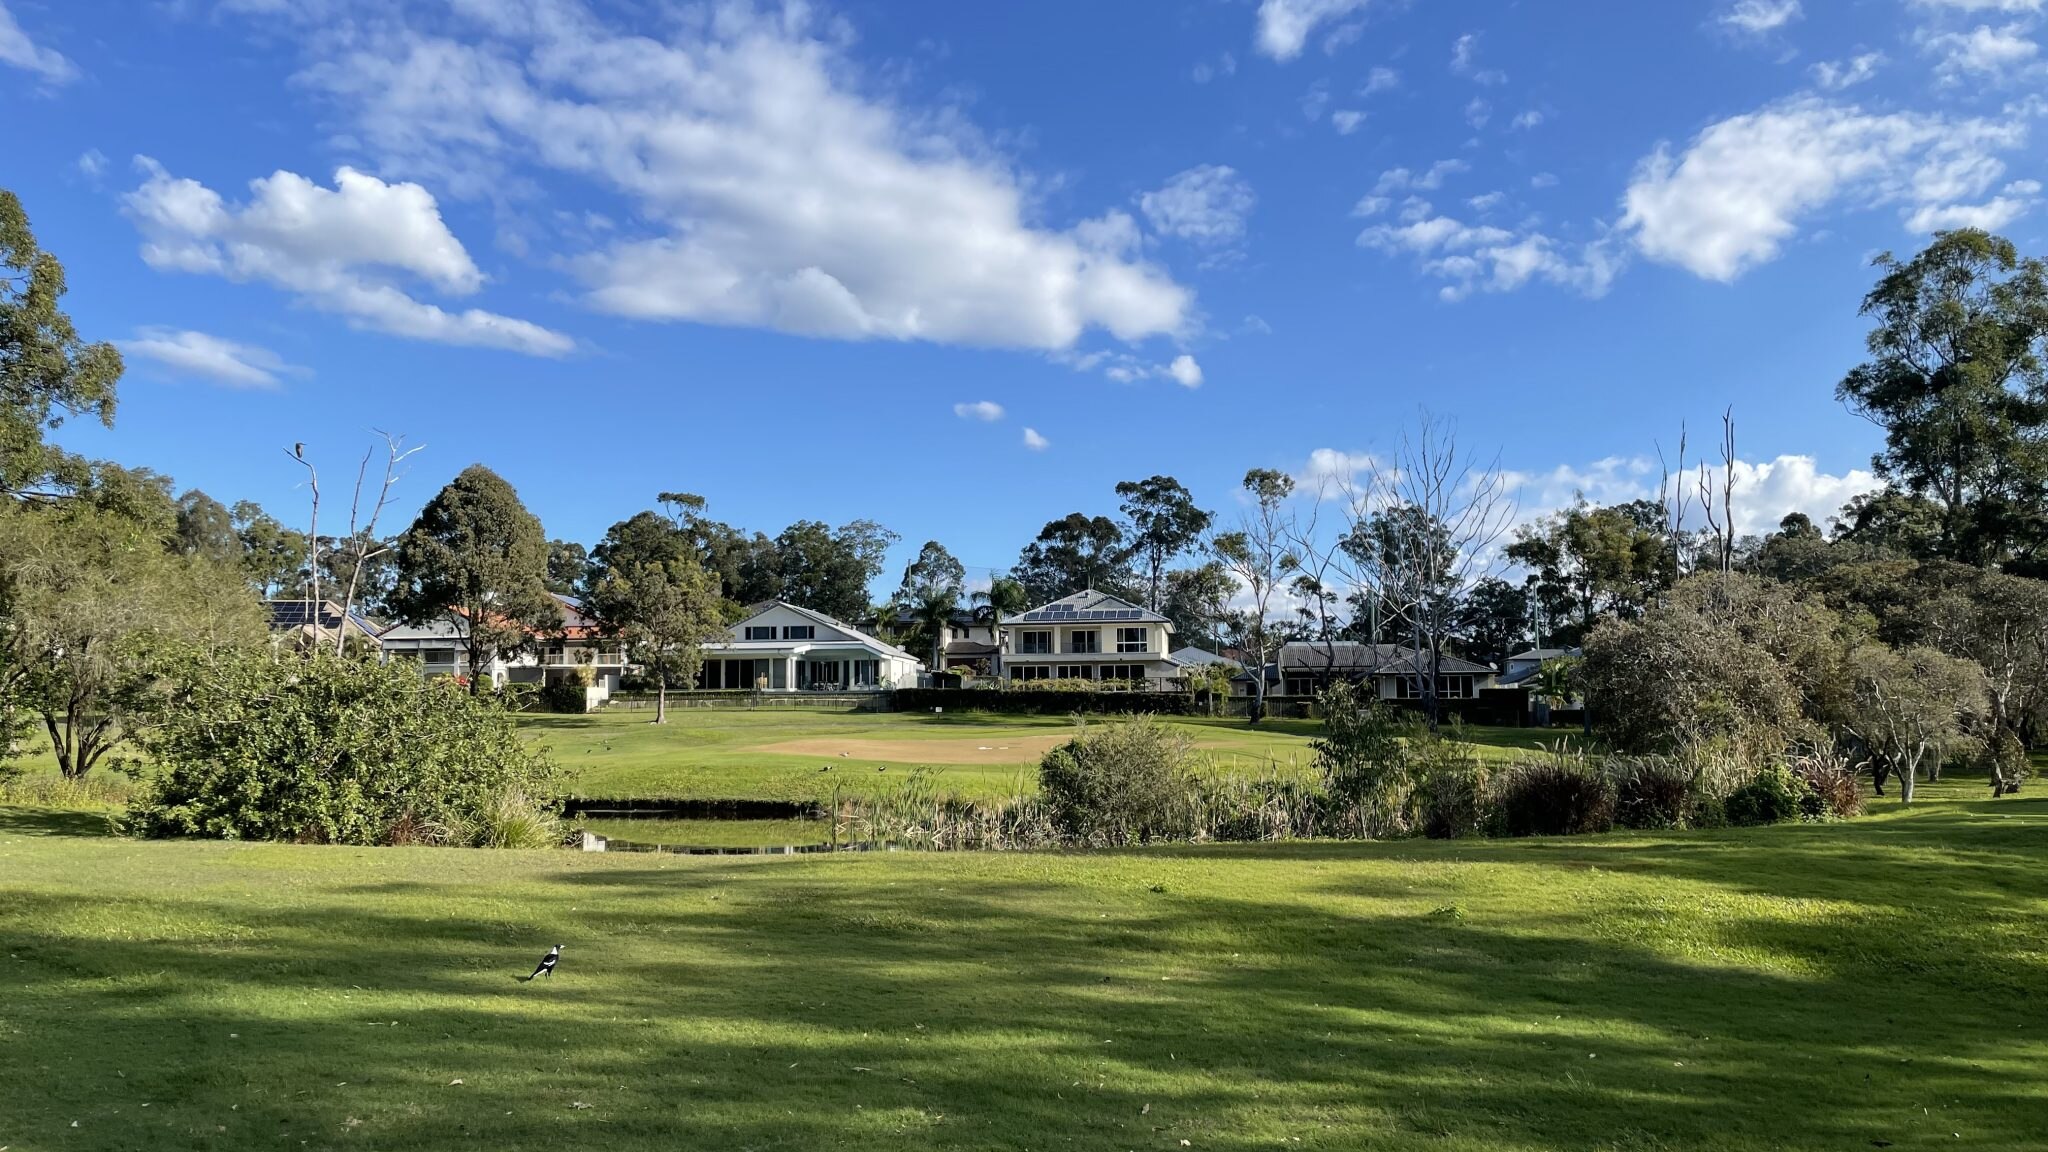 special override powers are proposed for this empty gold coast golf course. but experts say it doesn't guarantee housing